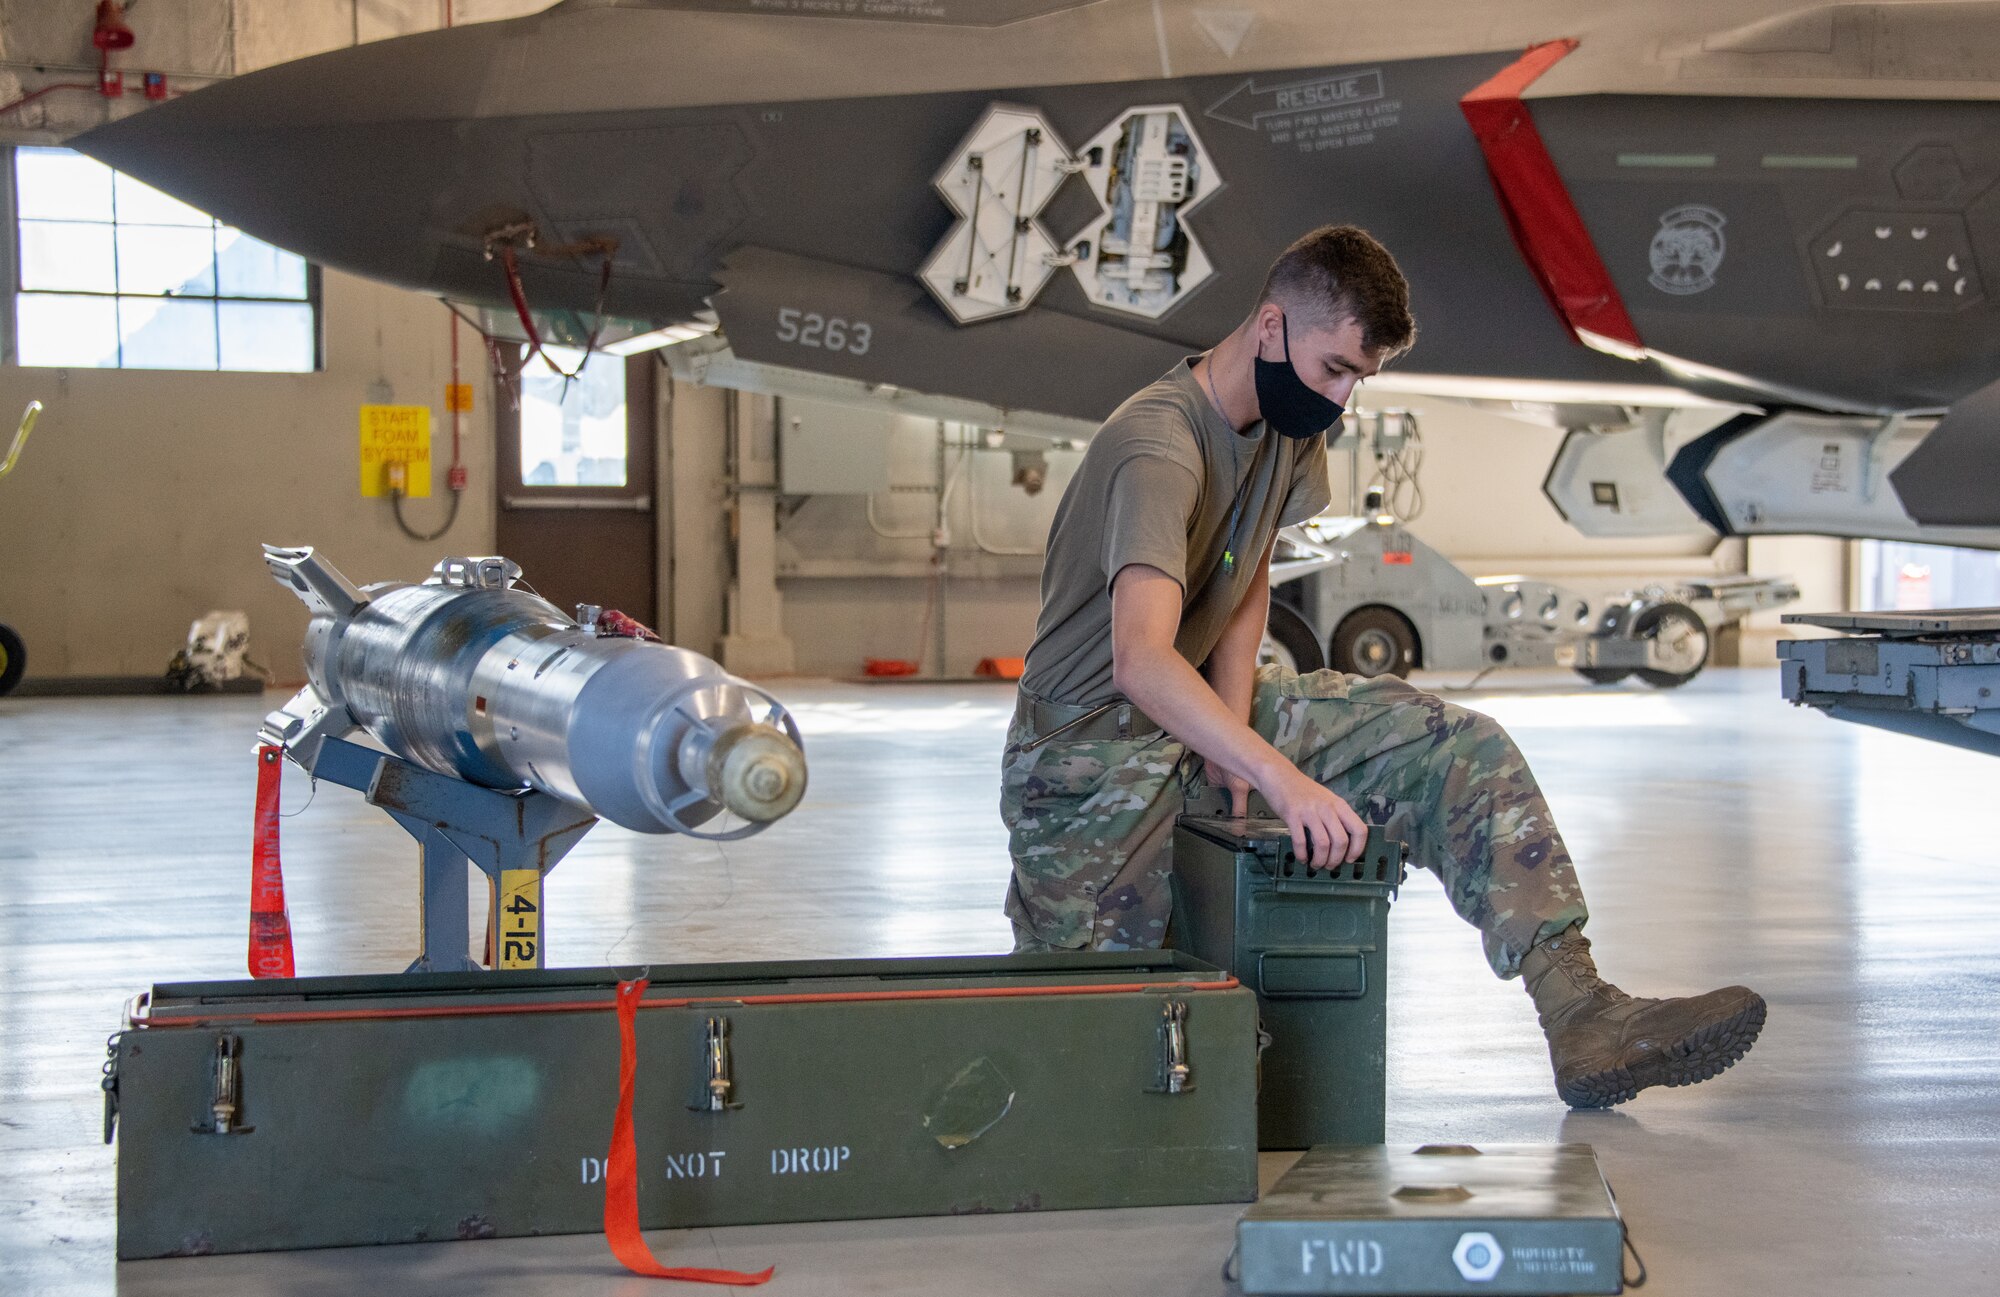 U.S. Air Force Staff Sgt. Connor Hansen from the 419th Aircraft Maintenance Squadron participates in a weapons load competition at Hill Air Force Base, Utah on Sept. 24, 2021. The quarterly competition focuses on speed, accuracy, and safety, ensuring standard loading procedures and proficiency across the wings. (U.S. Air Force photo by Senior Airman Erica Webster)